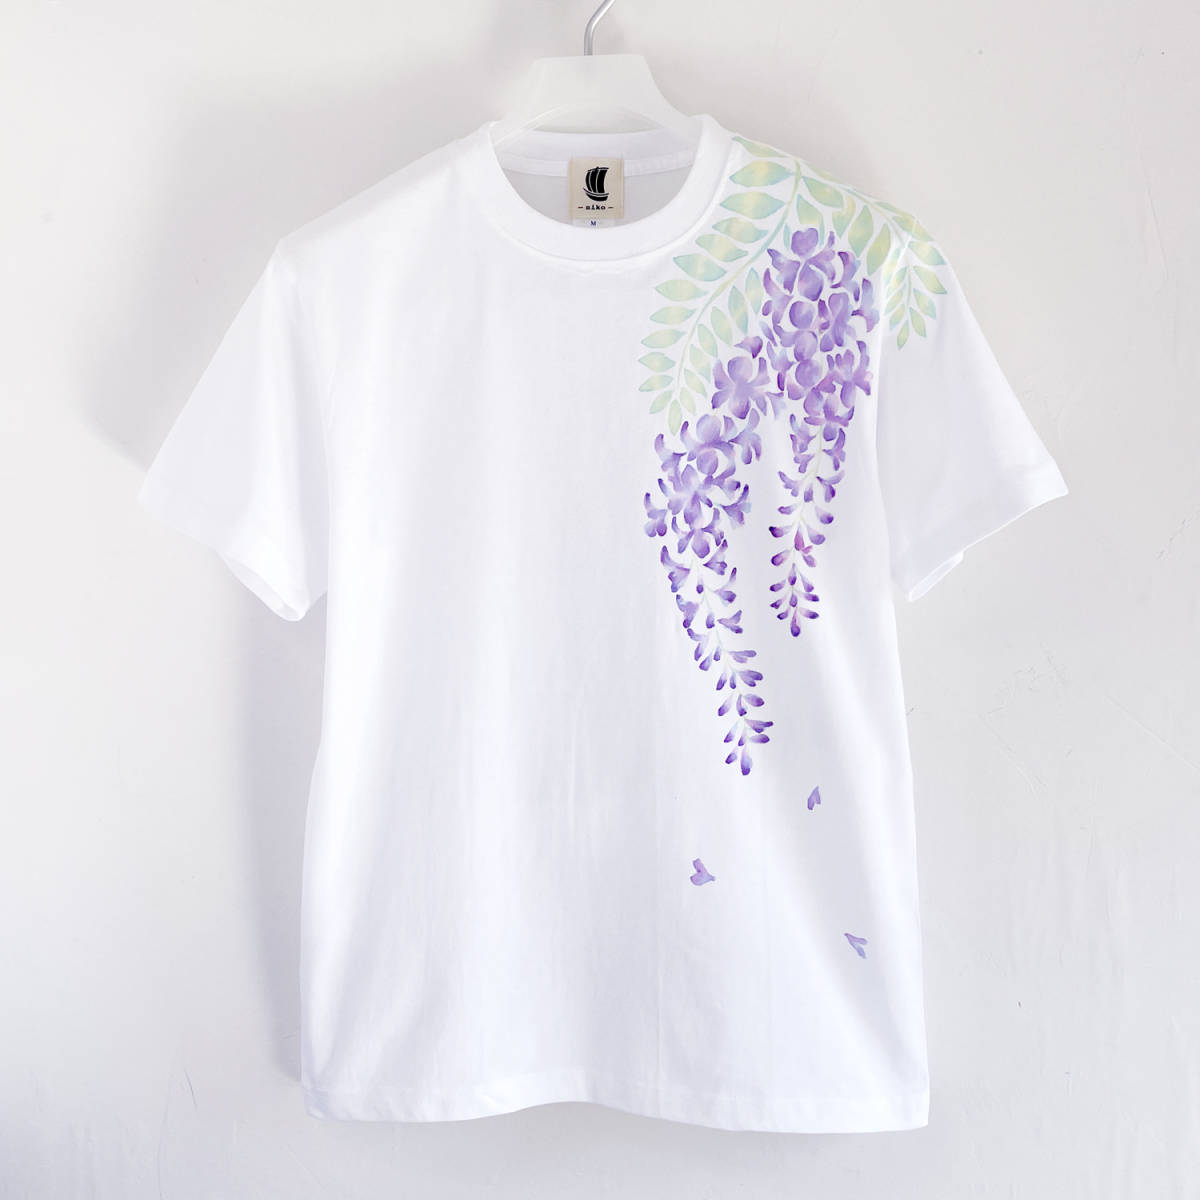 Men's T-shirt, size S, Wisteria flower pattern T-shirt, White, Handmade, Hand-drawn T-shirt, Floral pattern, Small size, Crew neck, Patterned